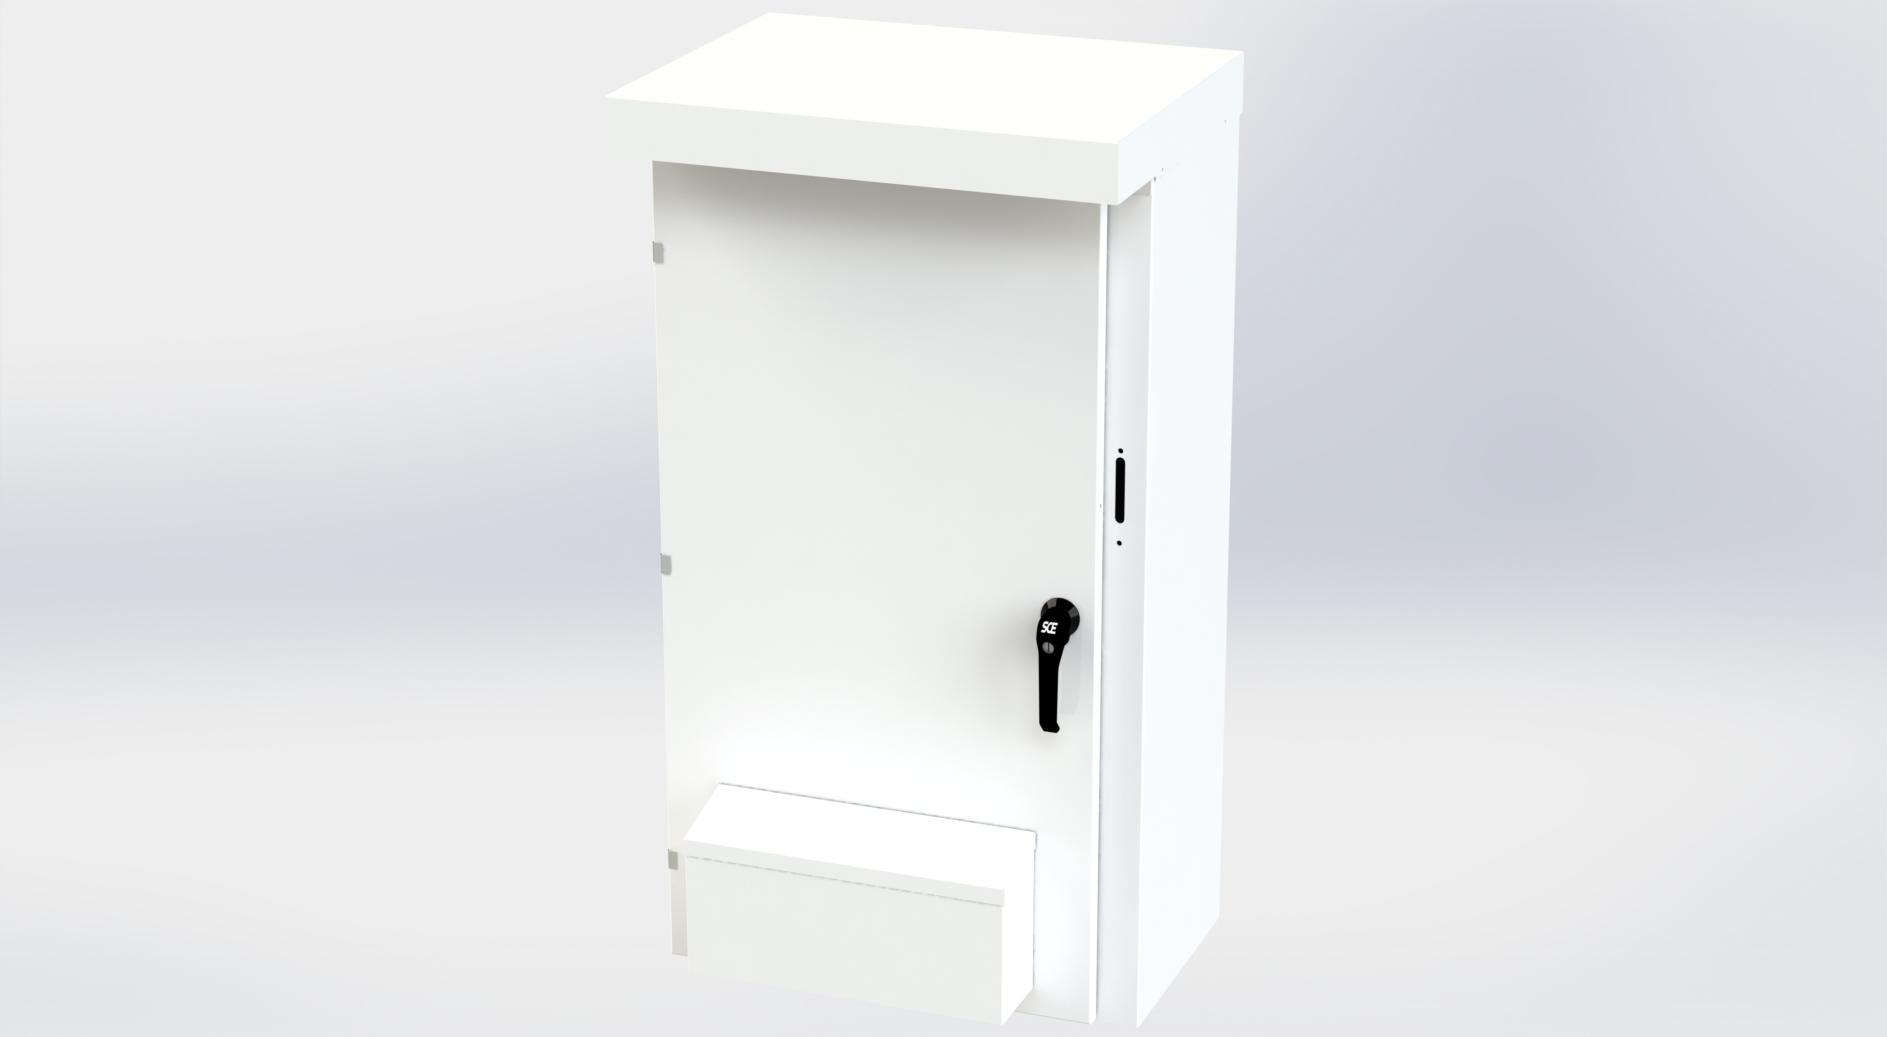 Saginaw Control SCE-47XVR2514 Enclosure, Vented Type 3R Disconnect, Height:47.00", Width:25.38", Depth:14.00", White powder coating inside and out. Optional sub-panels are powder coated white.